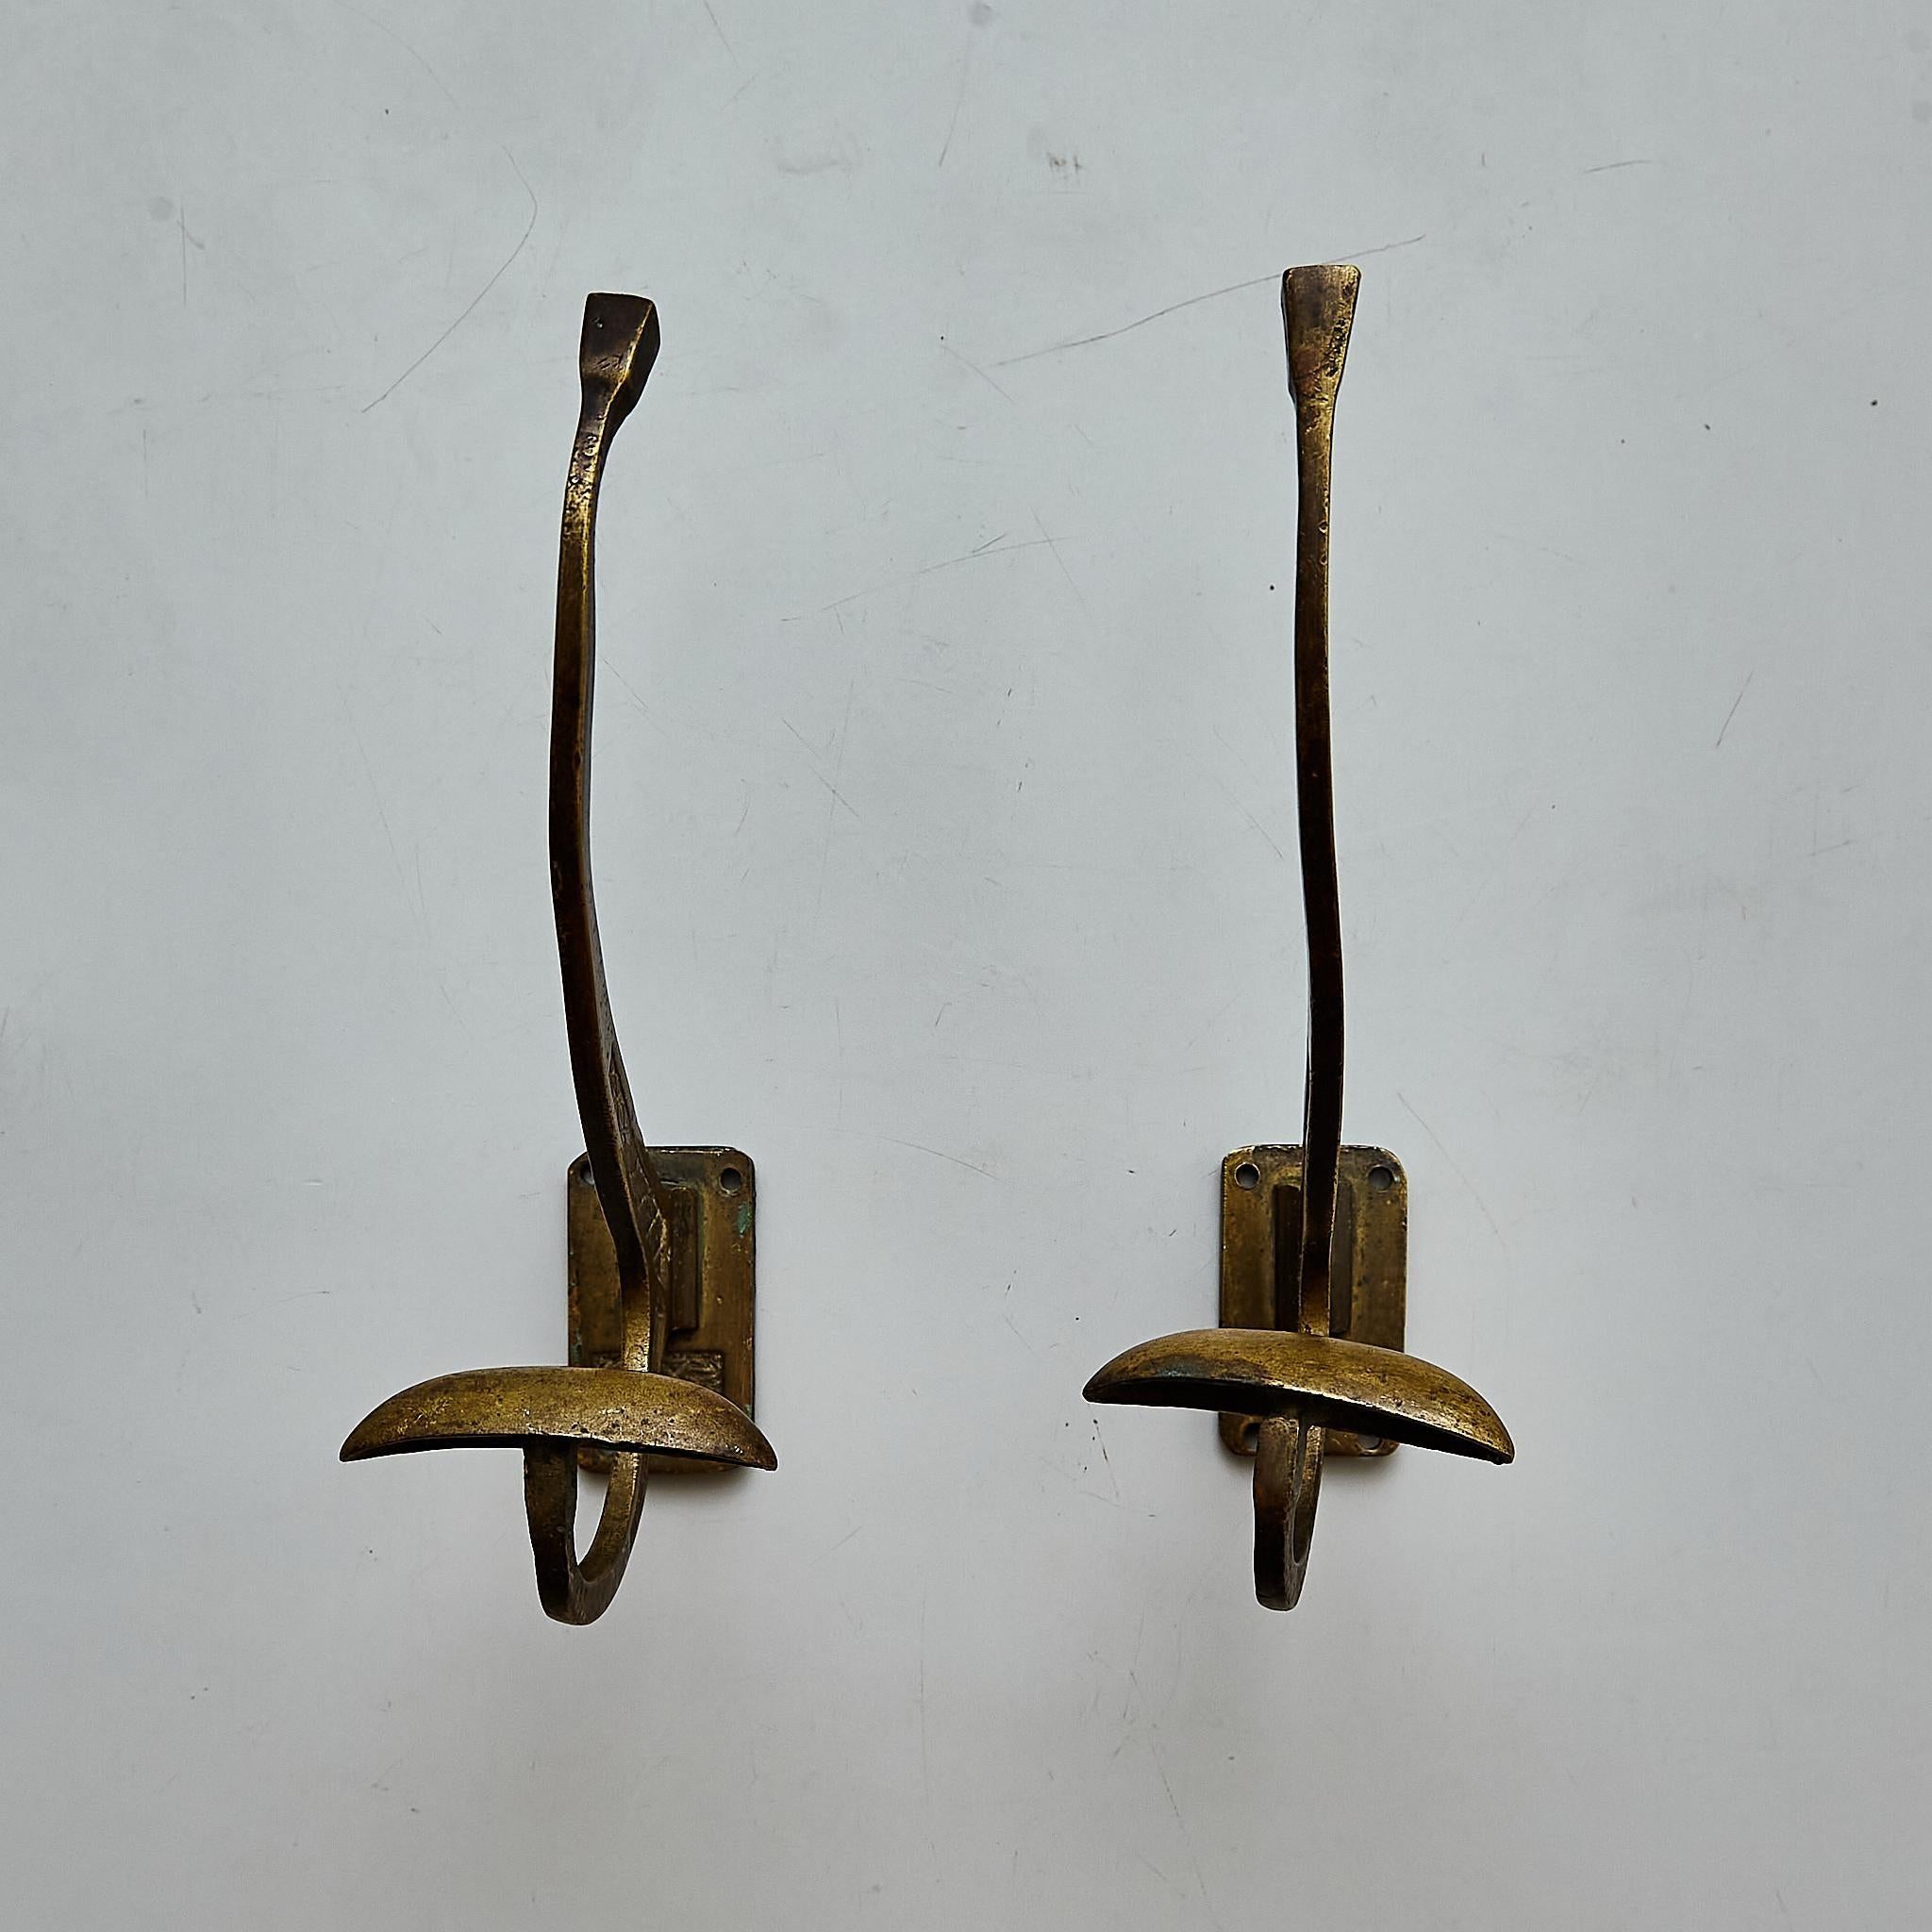 1940s Modernist Metal Coat Hangers with Stunning Patina For Sale 2